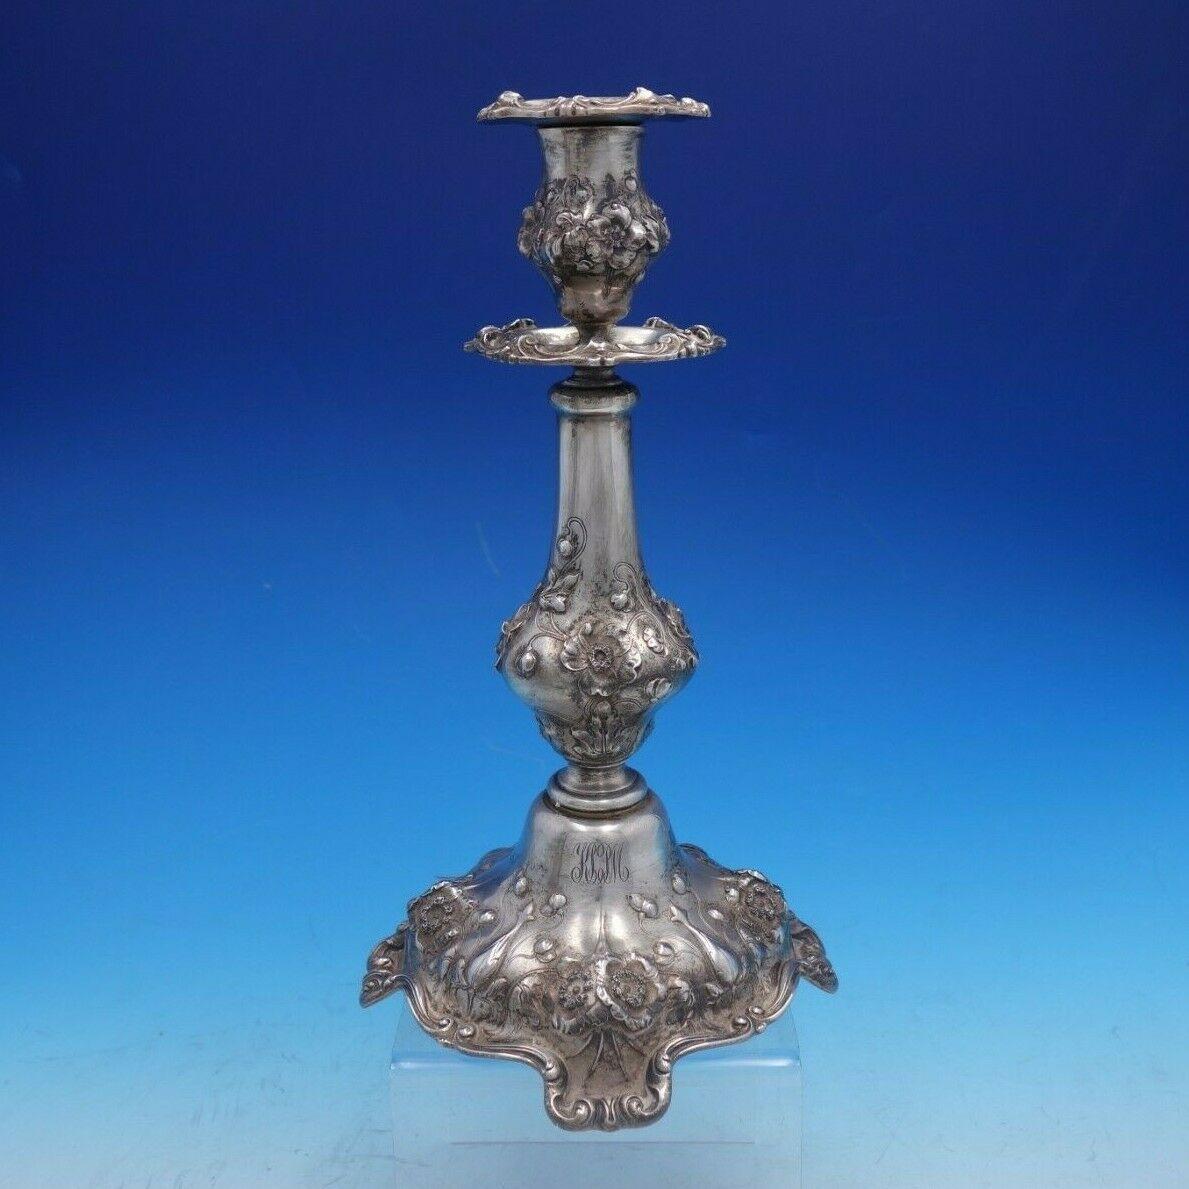 Reed & Barton

Les Six Fleurs by Reed & Barton pair of sterling silver candlestick holders marked #500A. They measure 11 1/4